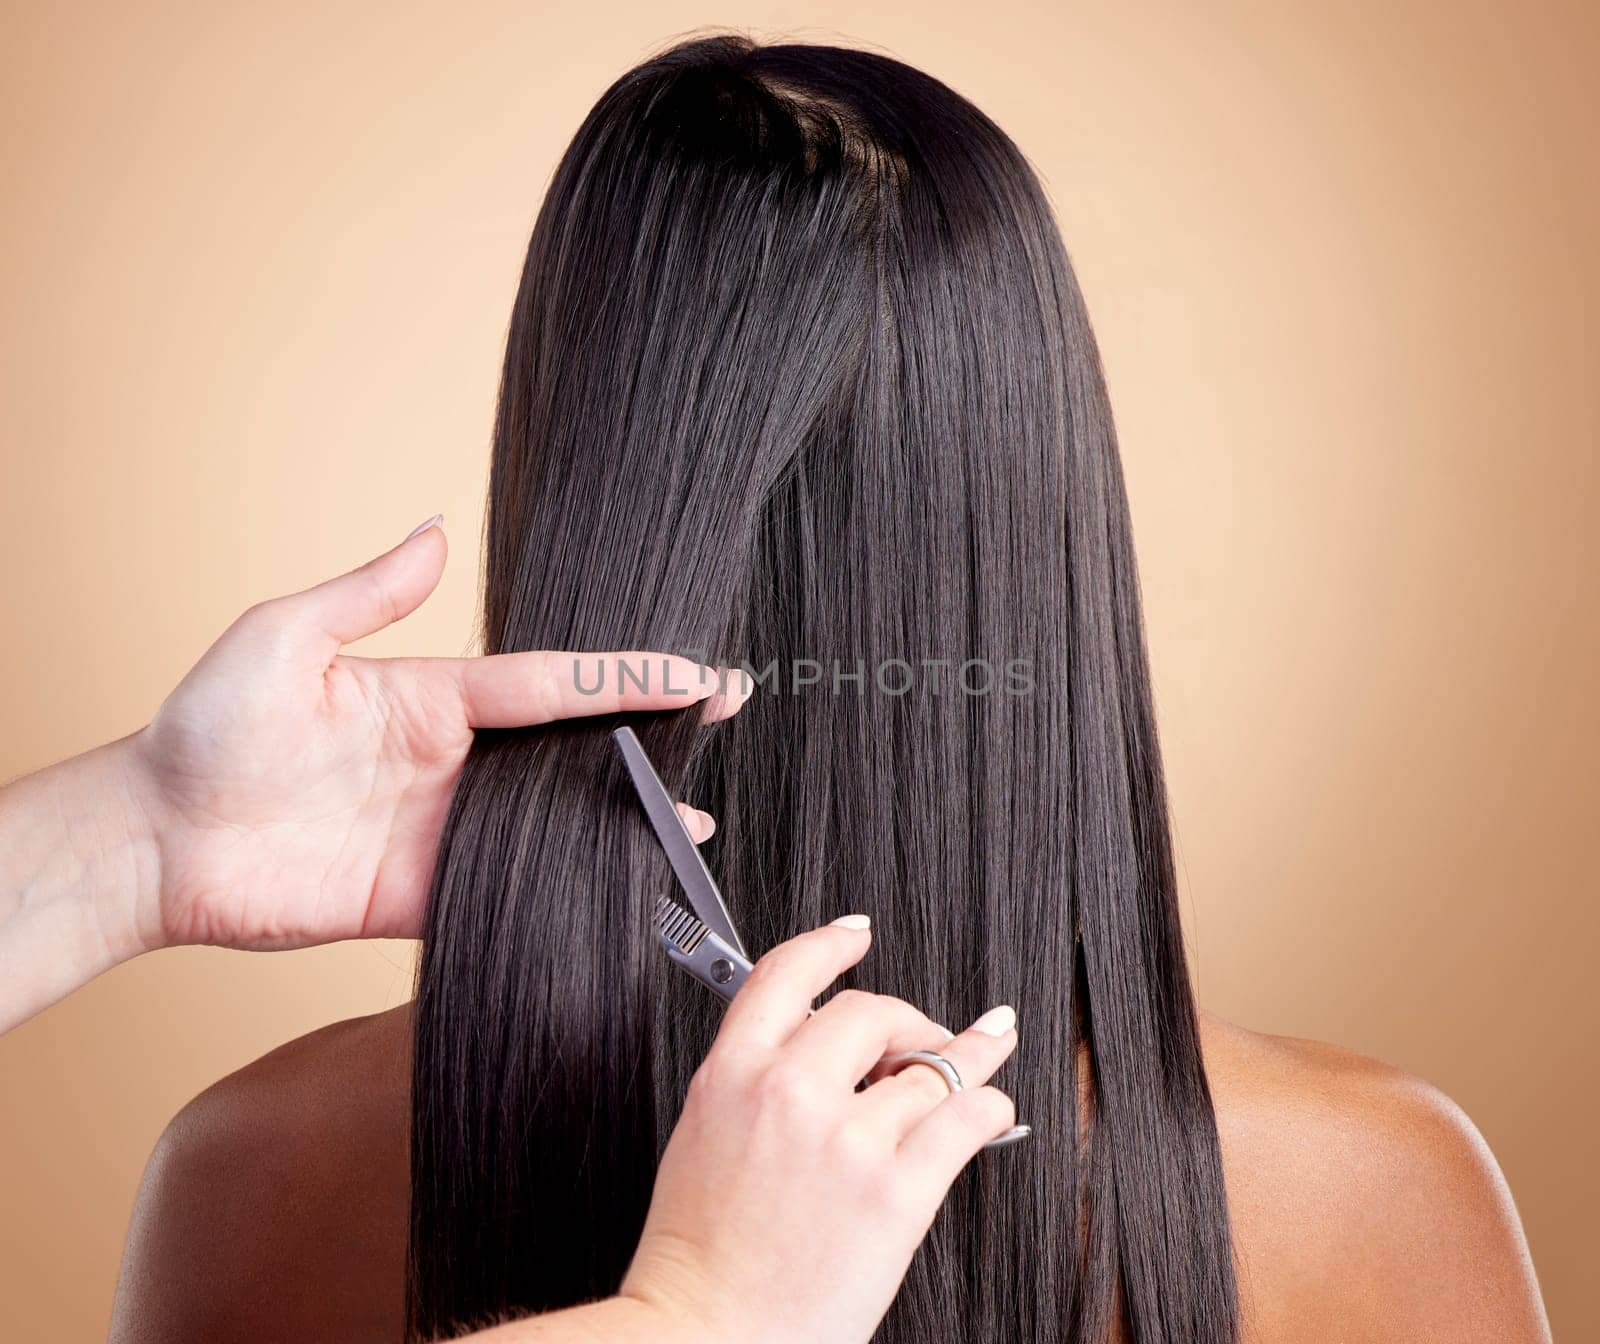 Back view, hands cut hair and woman, beauty and shine, cosmetic care isolated on studio background. Female people at hairdresser salon, scissors and makeover transformation with texture and trim.